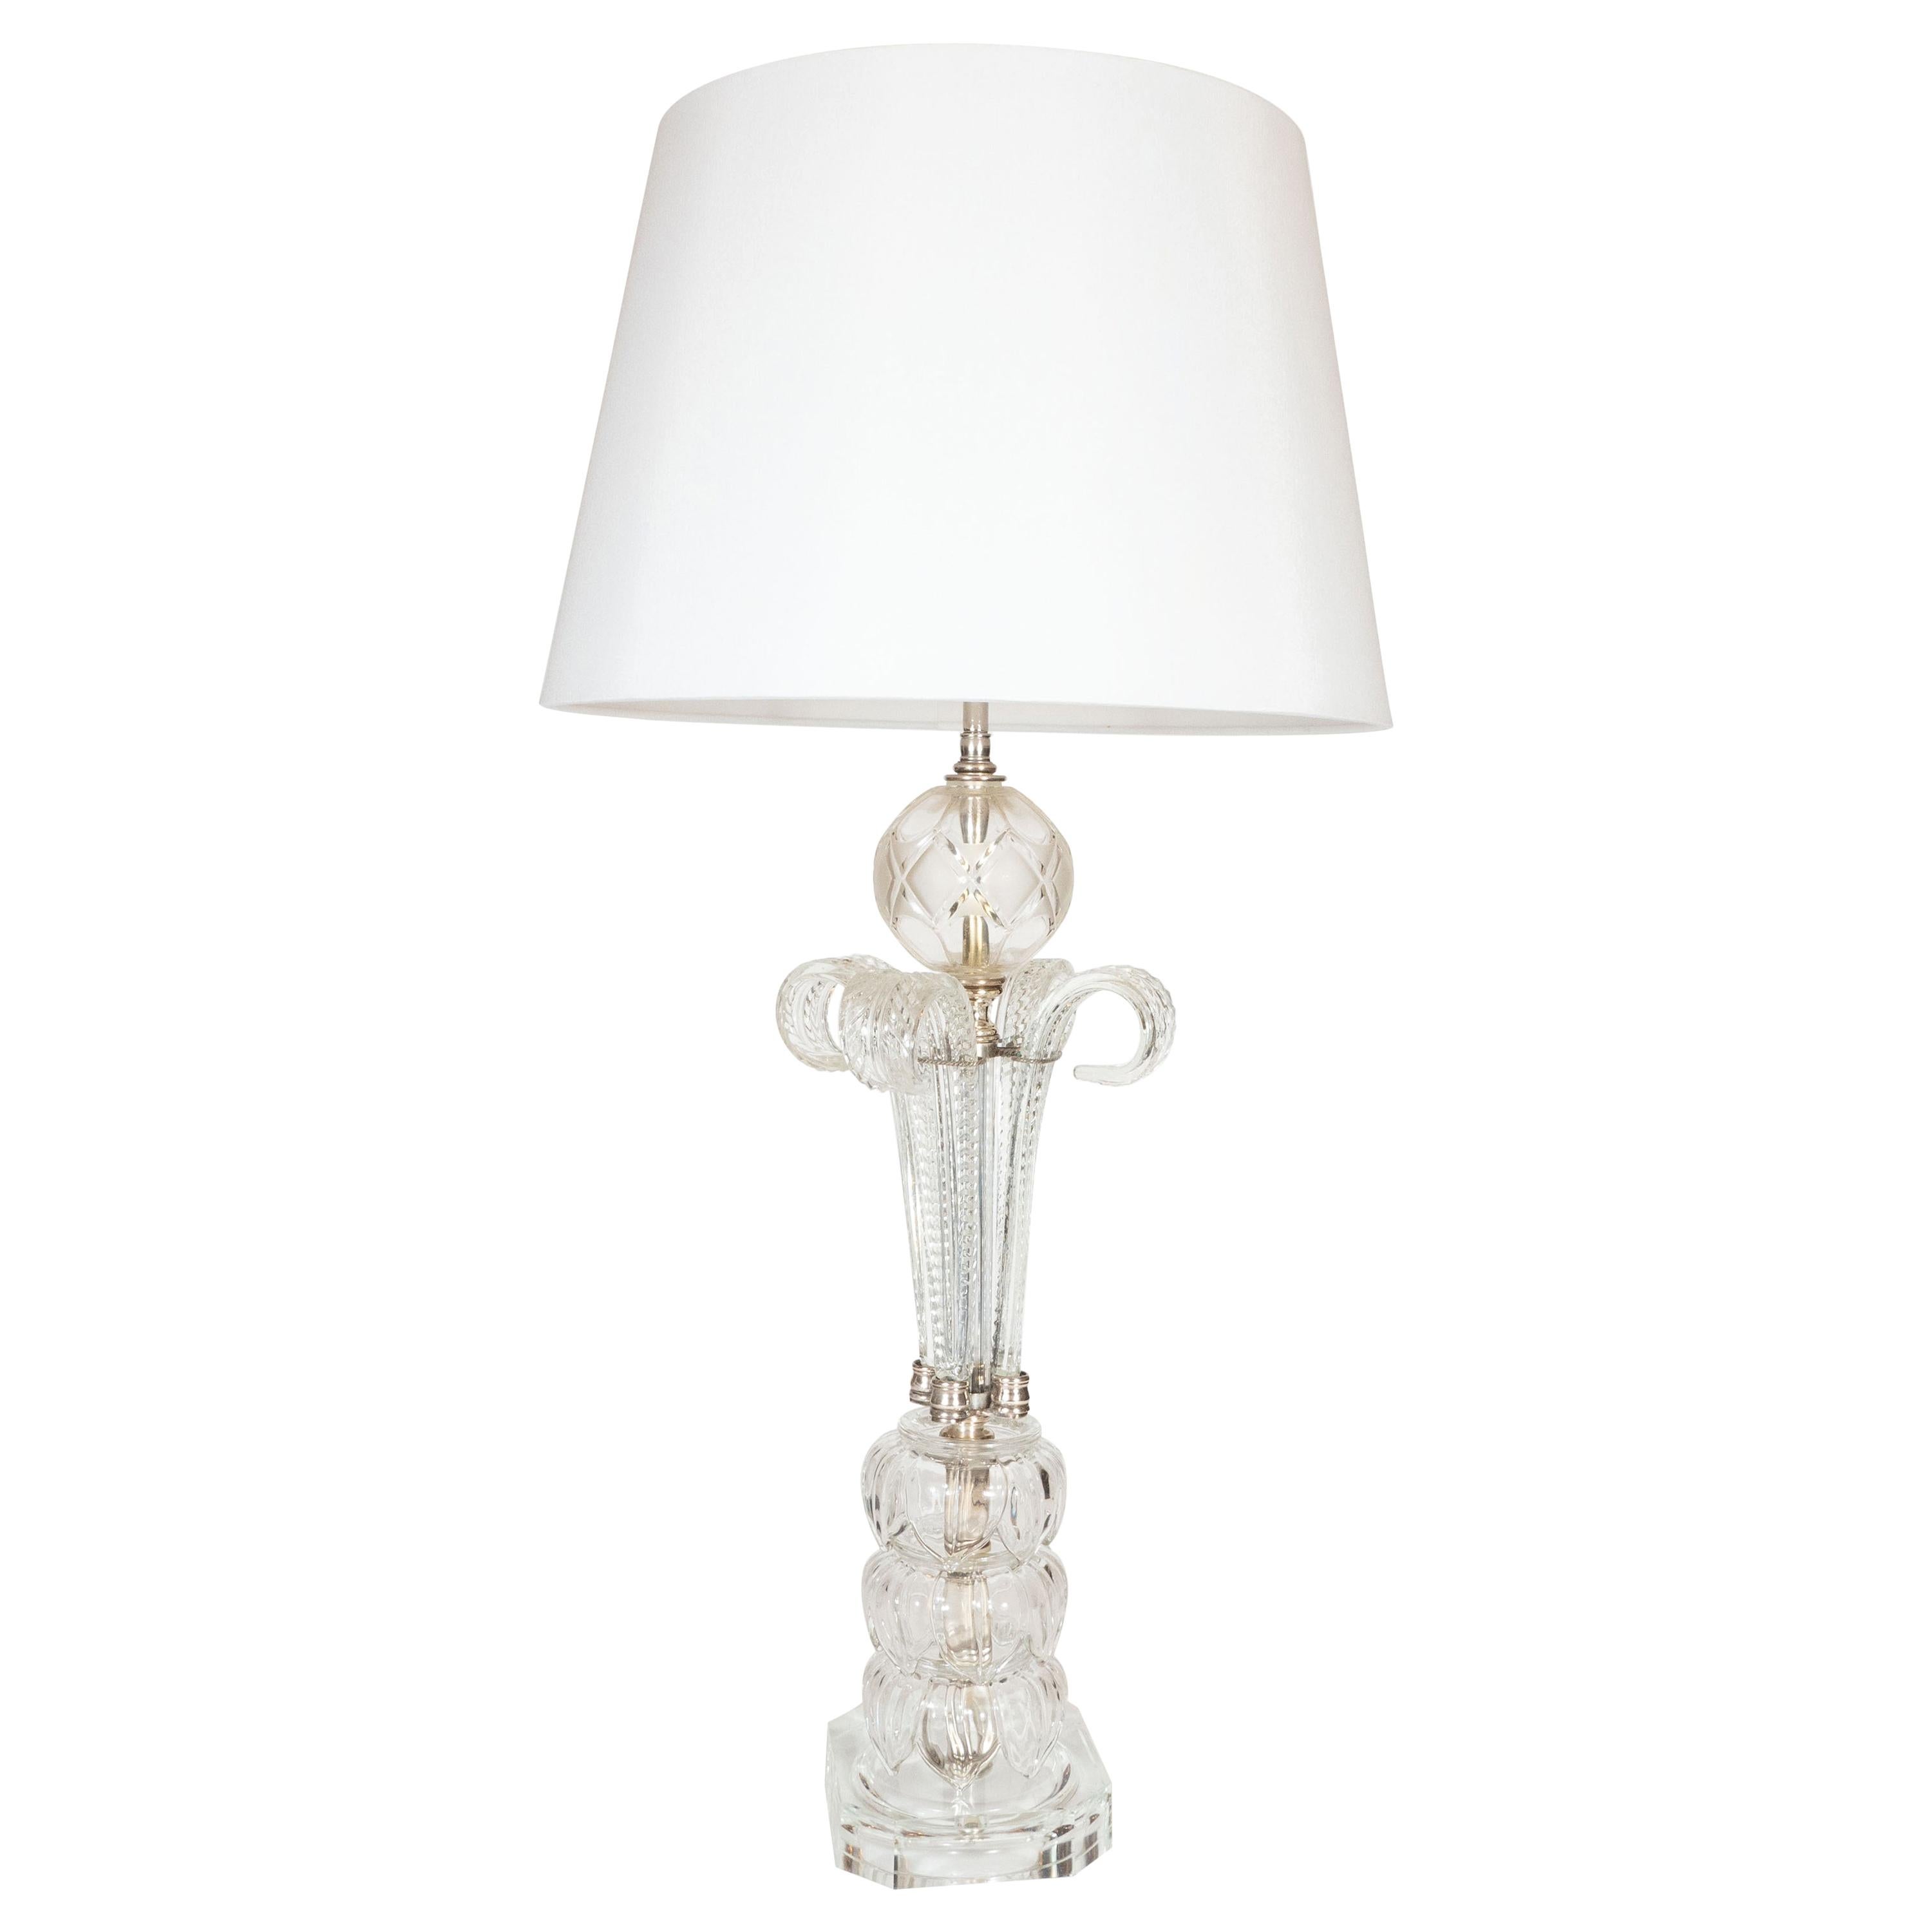 1940s Hollywood Regency Translucent Cut Crystal Table Lamp with Acanthus Details